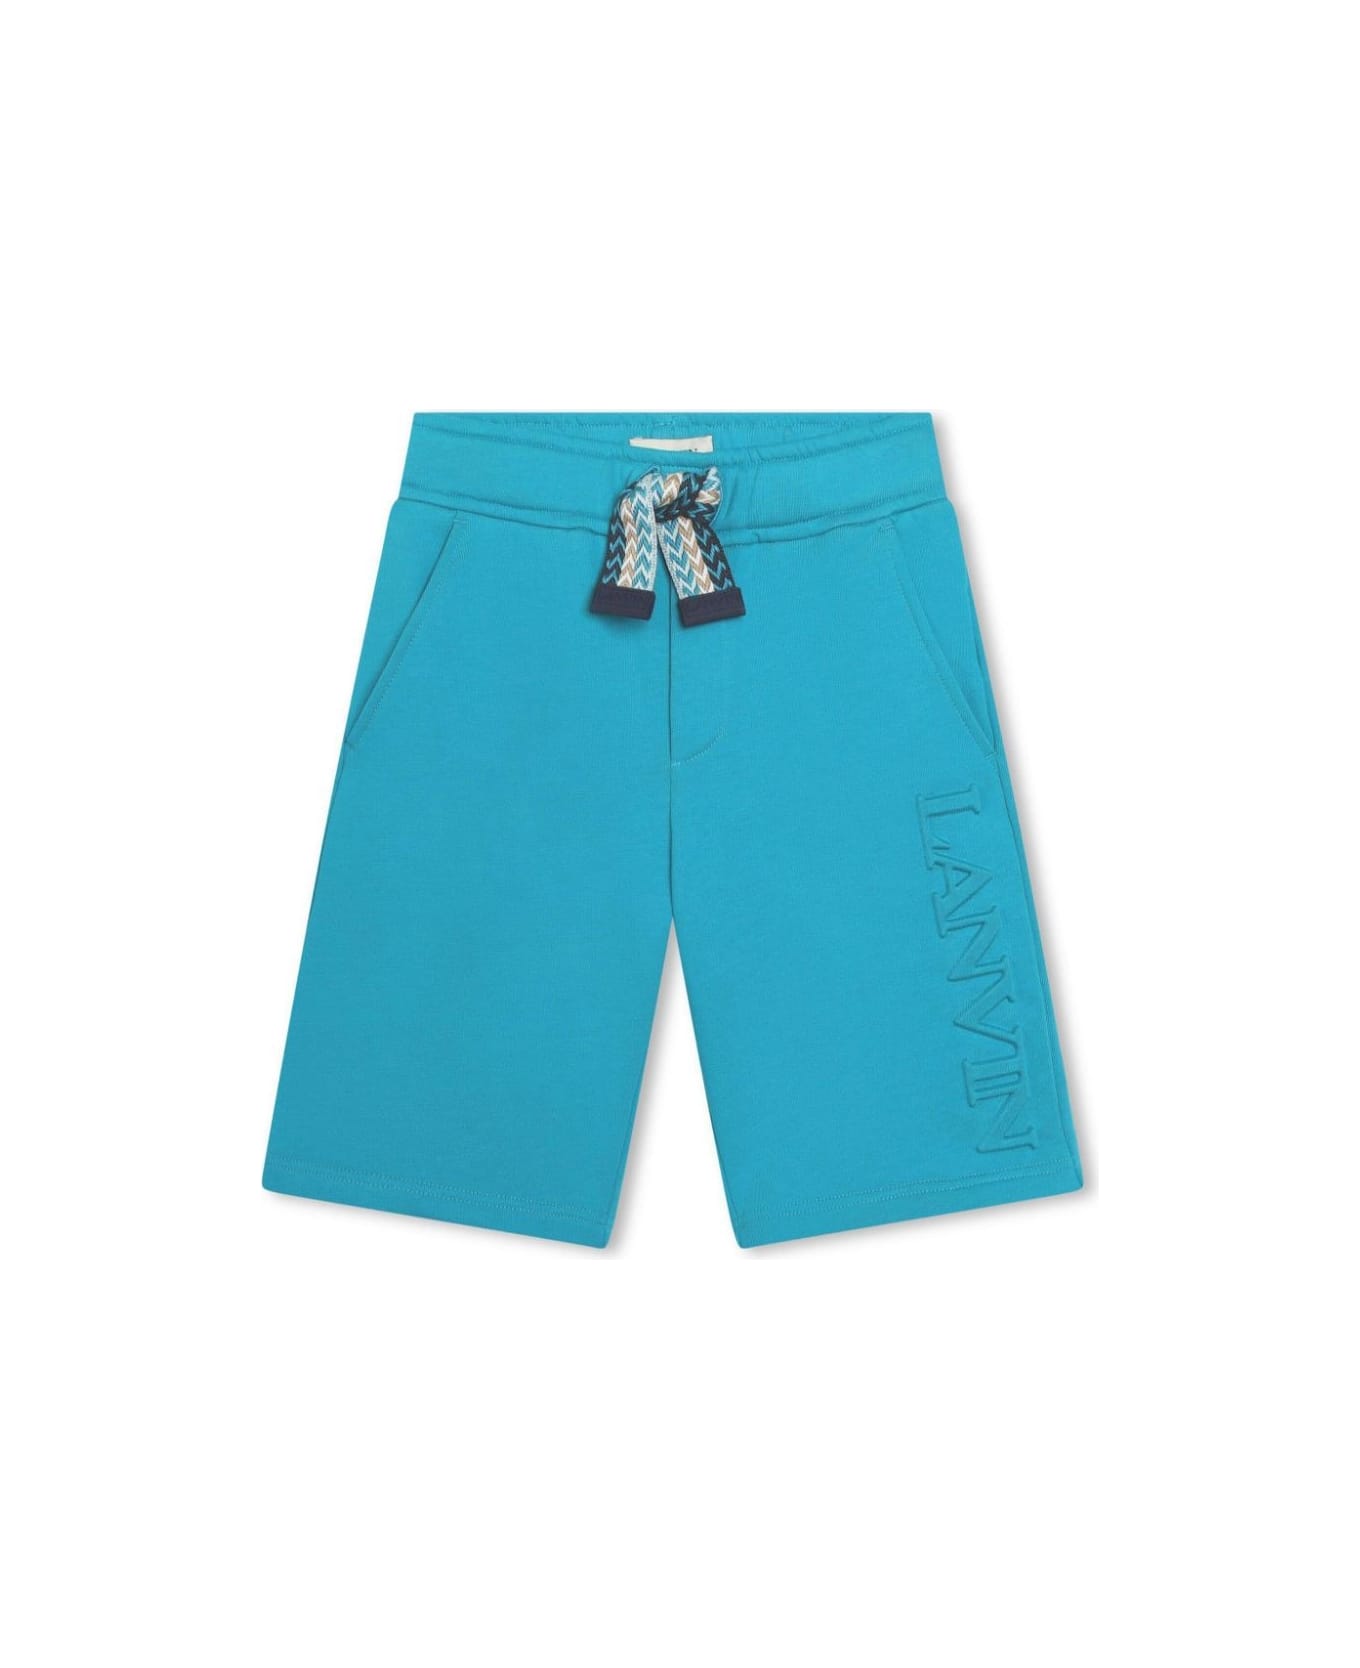 Lanvin Turquoise Shorts With Logo And 'curb' Motif - Turchese ボトムス